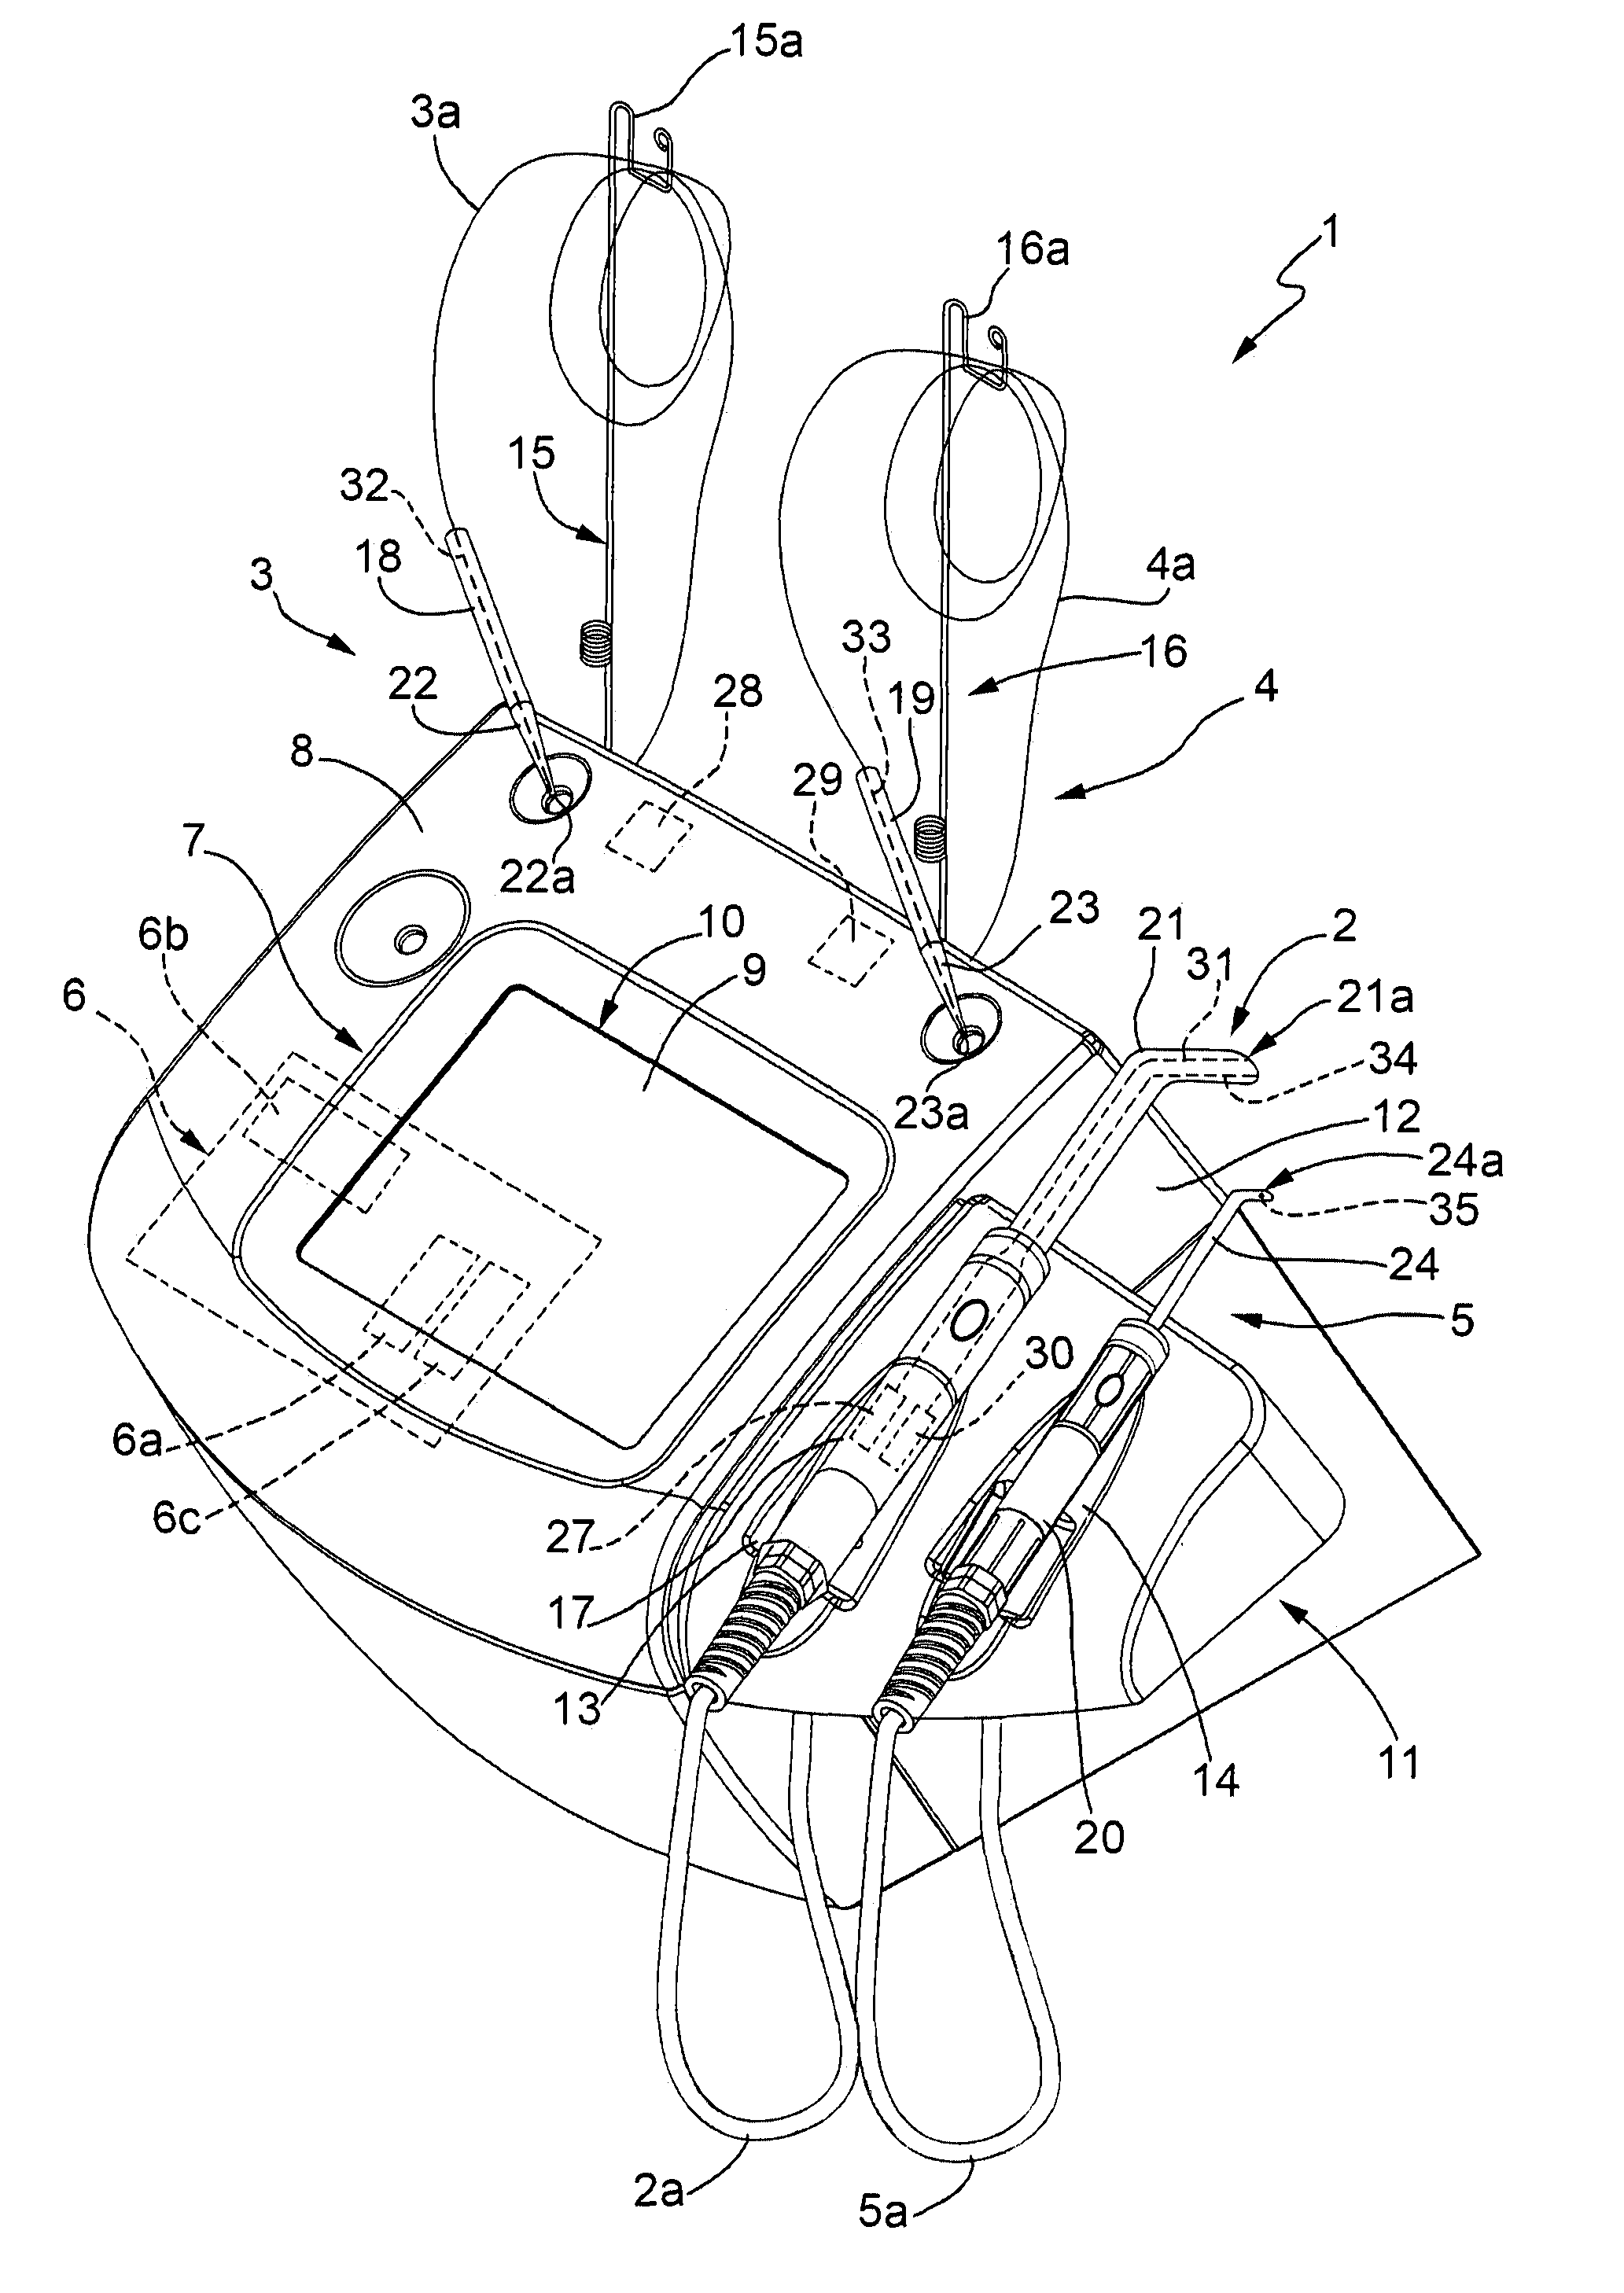 Device for Dentistry Treatments